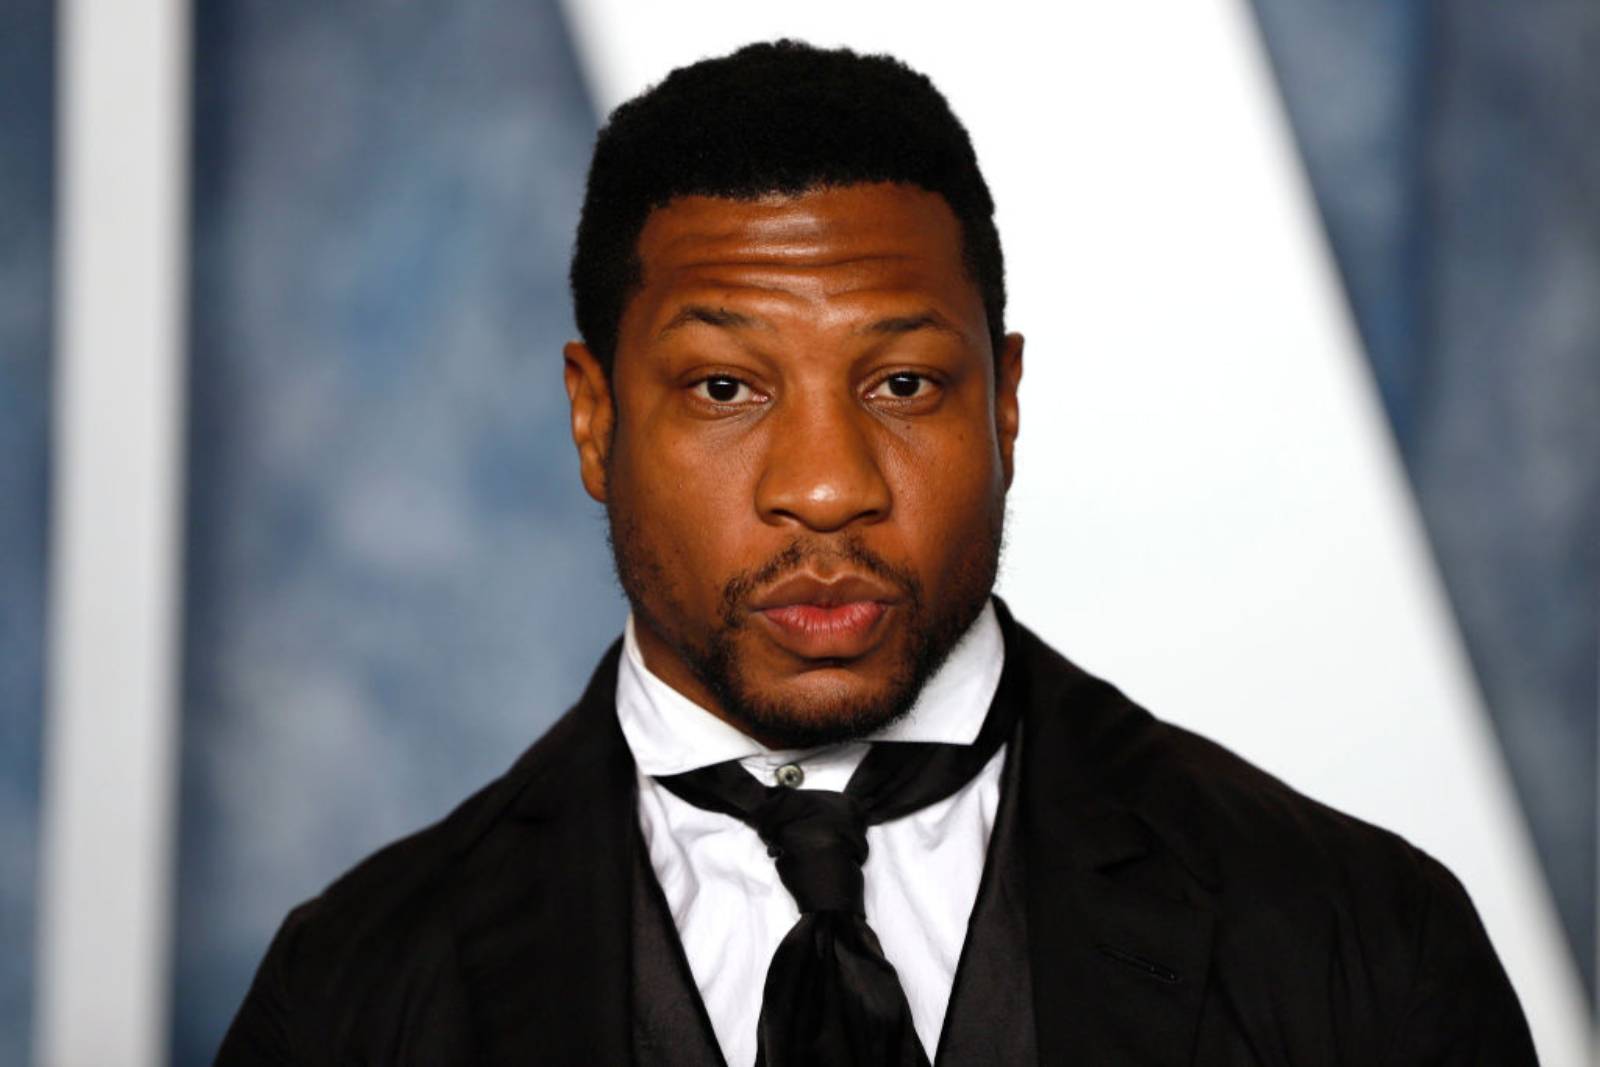  Jonathan Majors attends 2023 Vanity Fair Oscar After Party Arrivals at Wallis Annenberg Center for the Performing Arts on March 12, 2023 in Beverly Hills, California. (Photo by Robert Smith/Patrick McMullan via Getty Images)